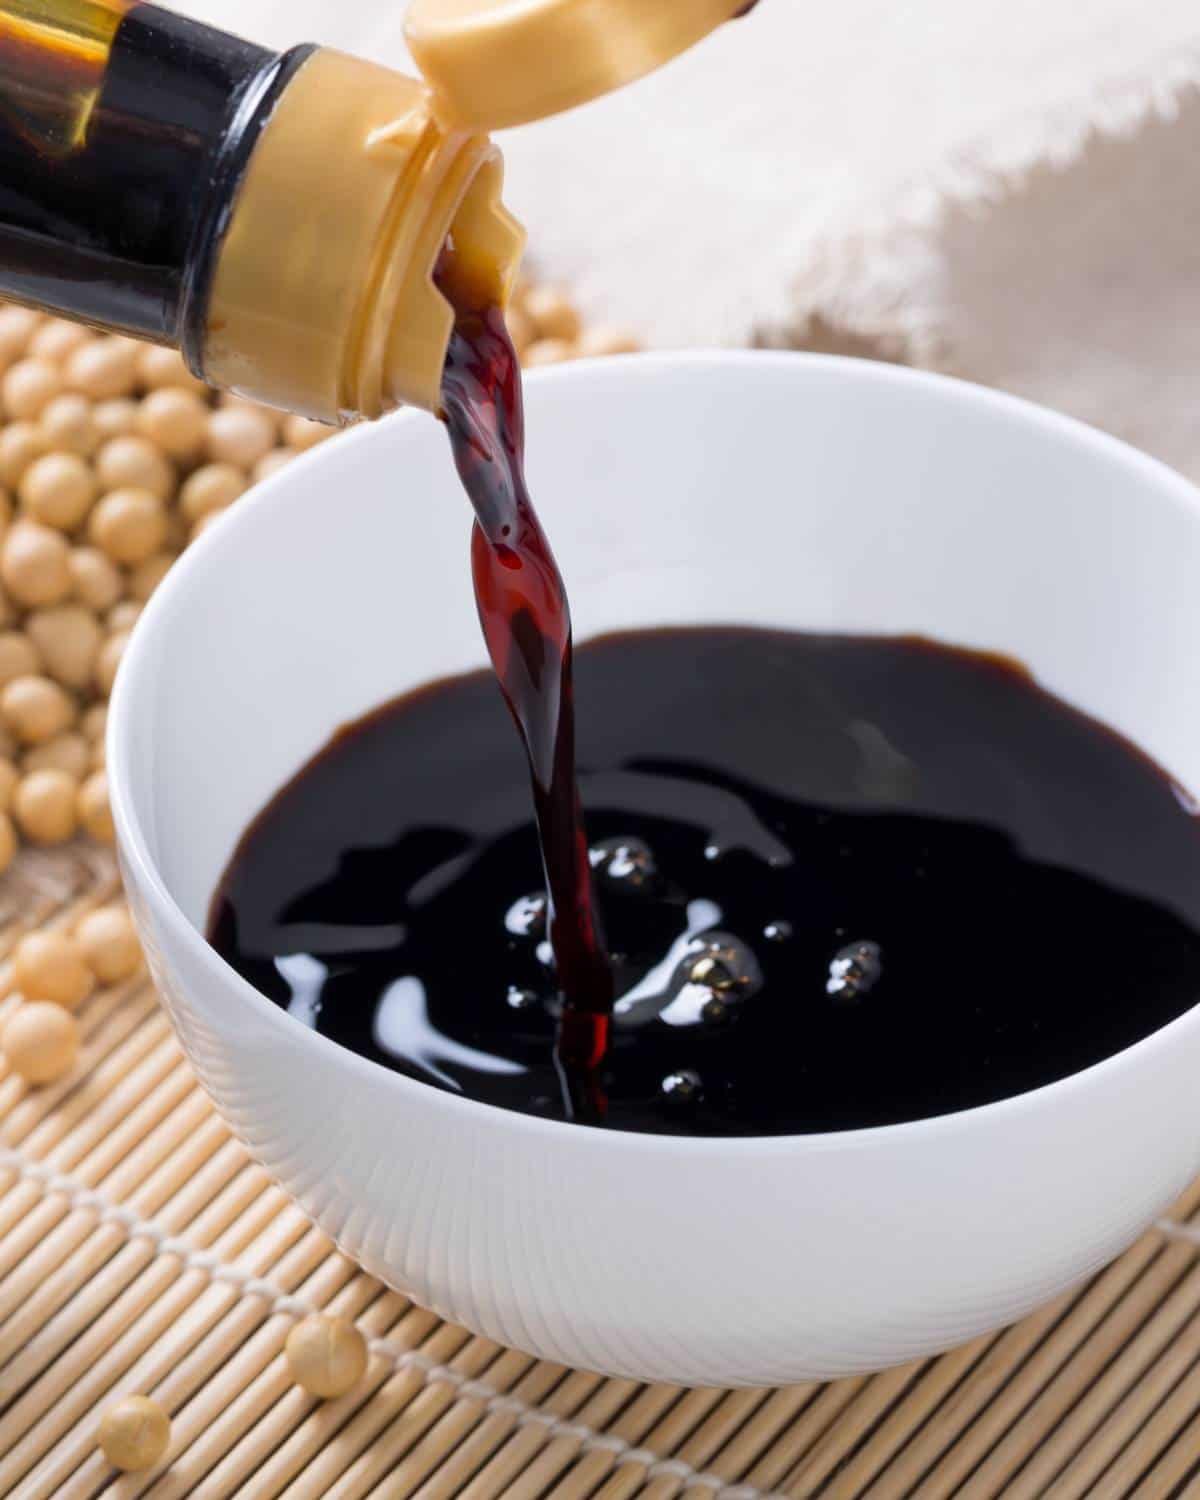 Soy sauce being poured into a bowl with soy beans in the background.